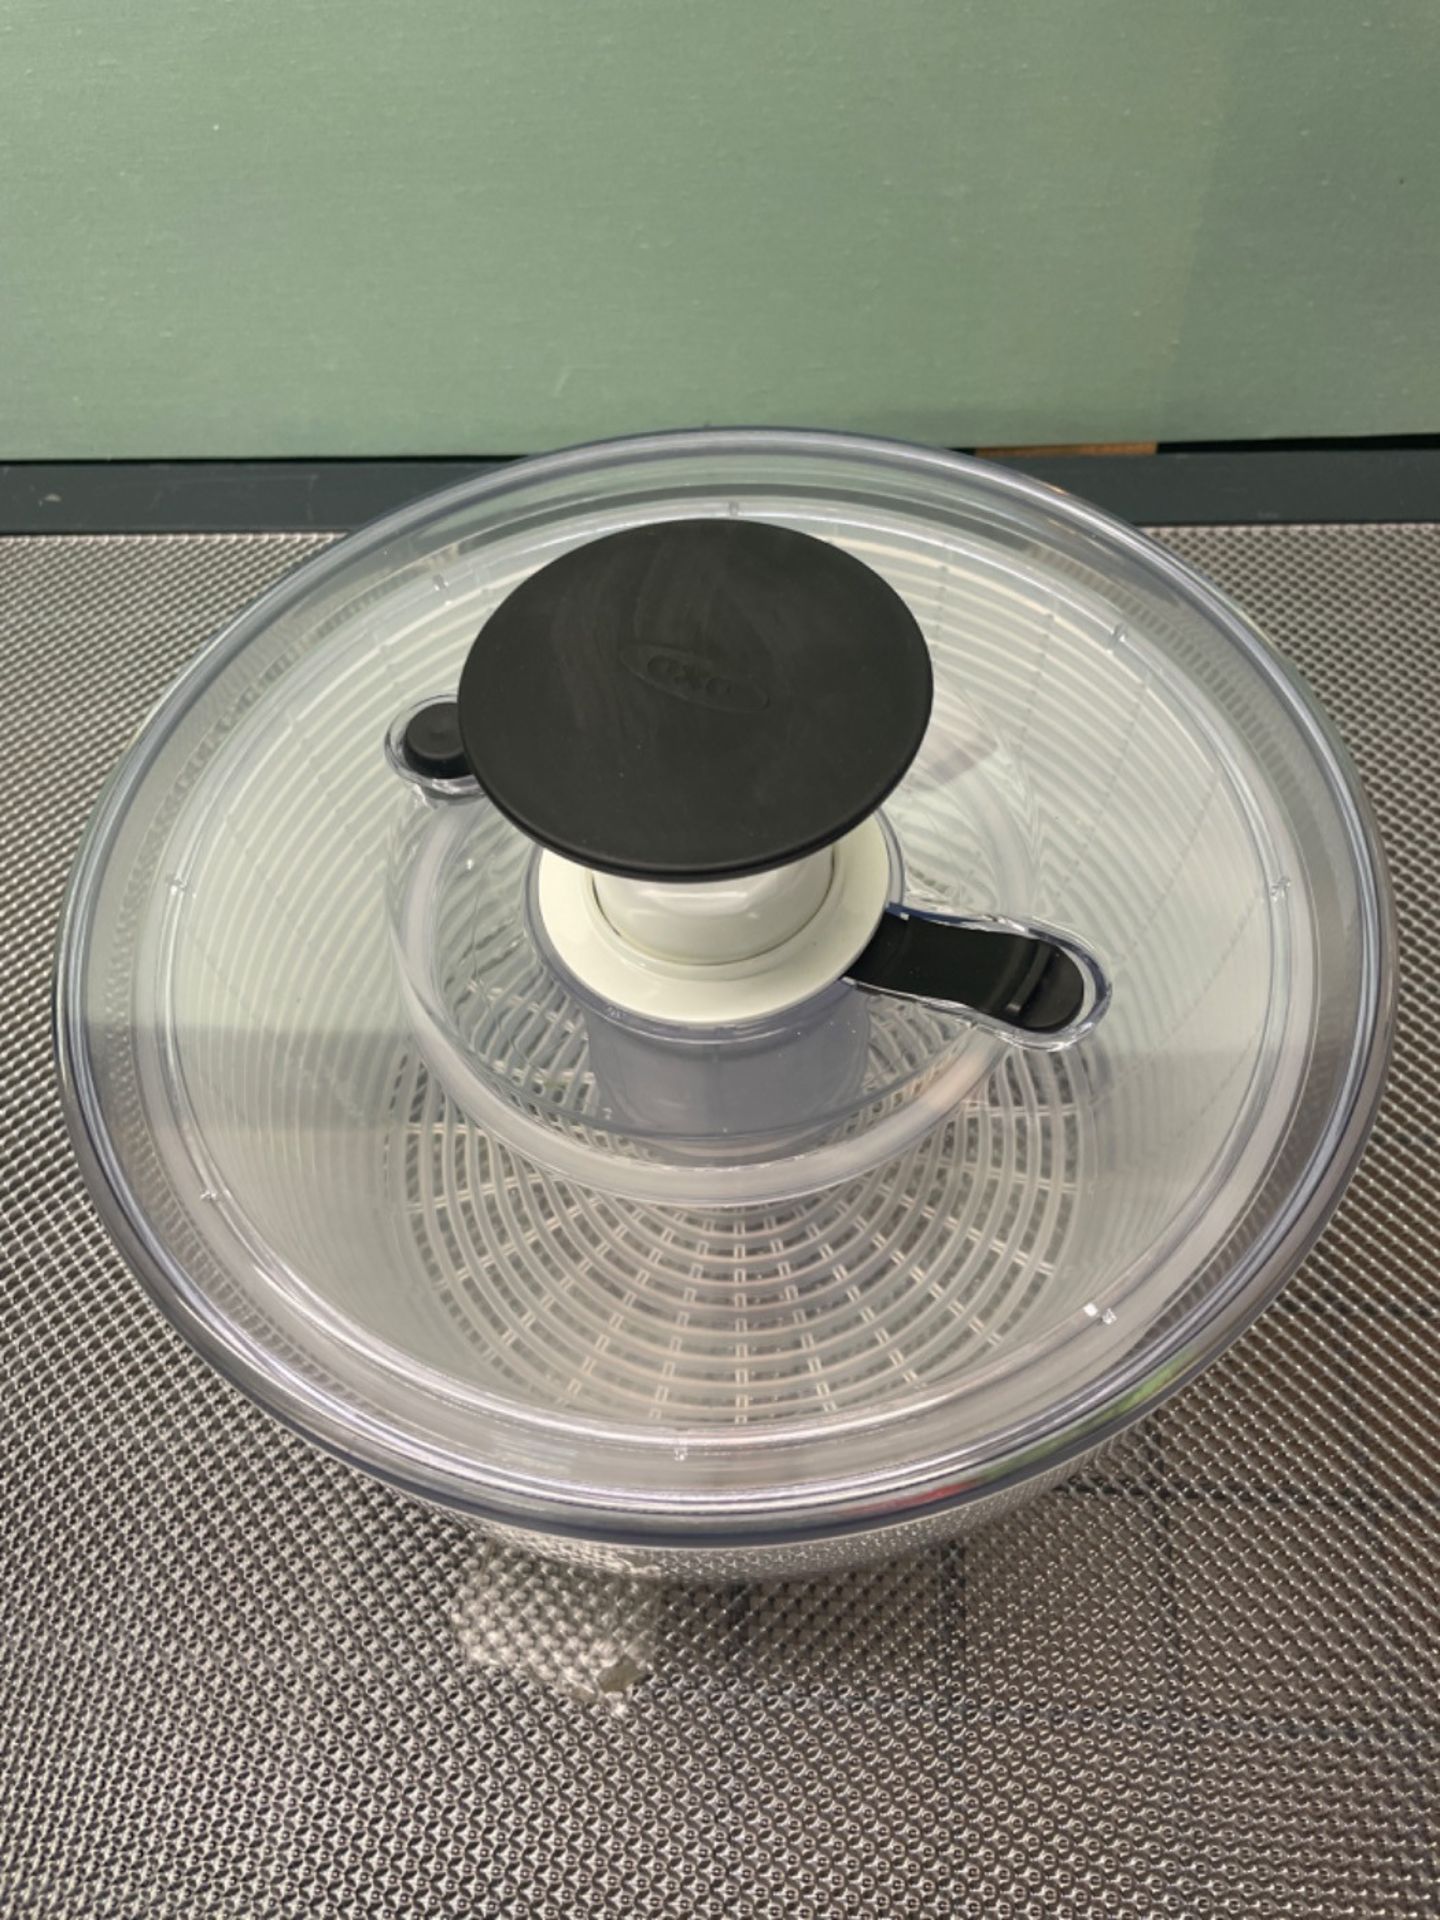 OXO Good Grips Salad Spinner - Image 3 of 3